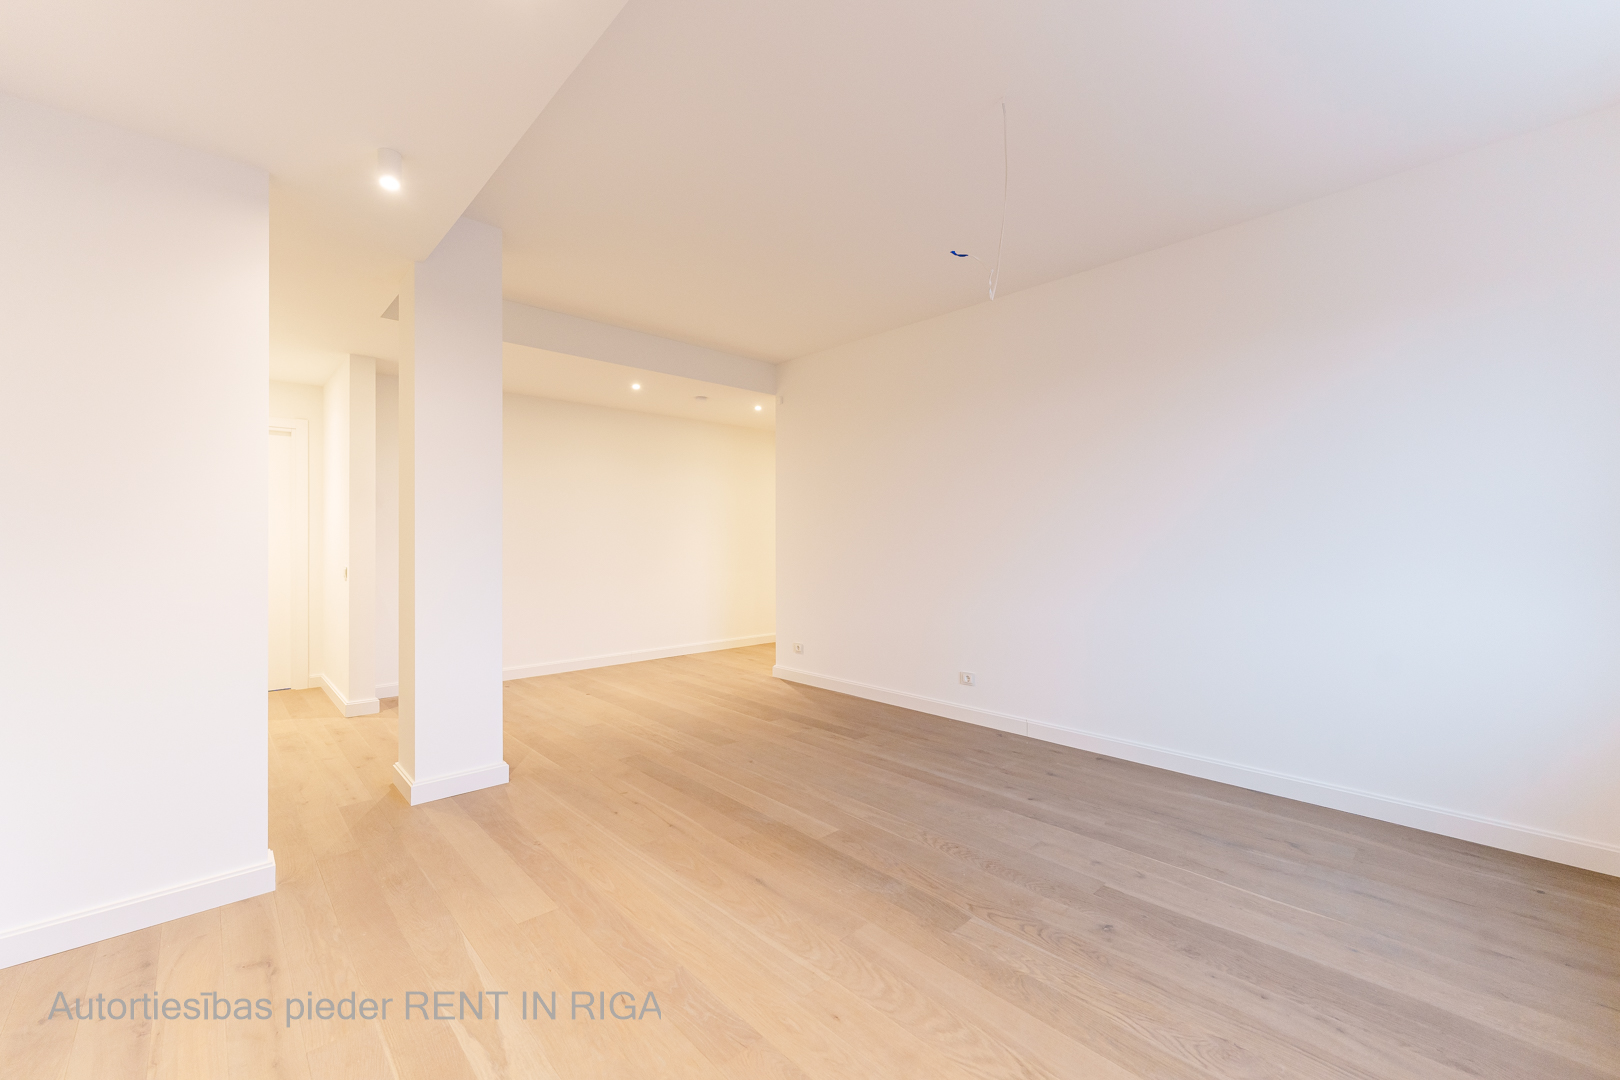 Apartment for sale, Stabu street 100 - Image 1